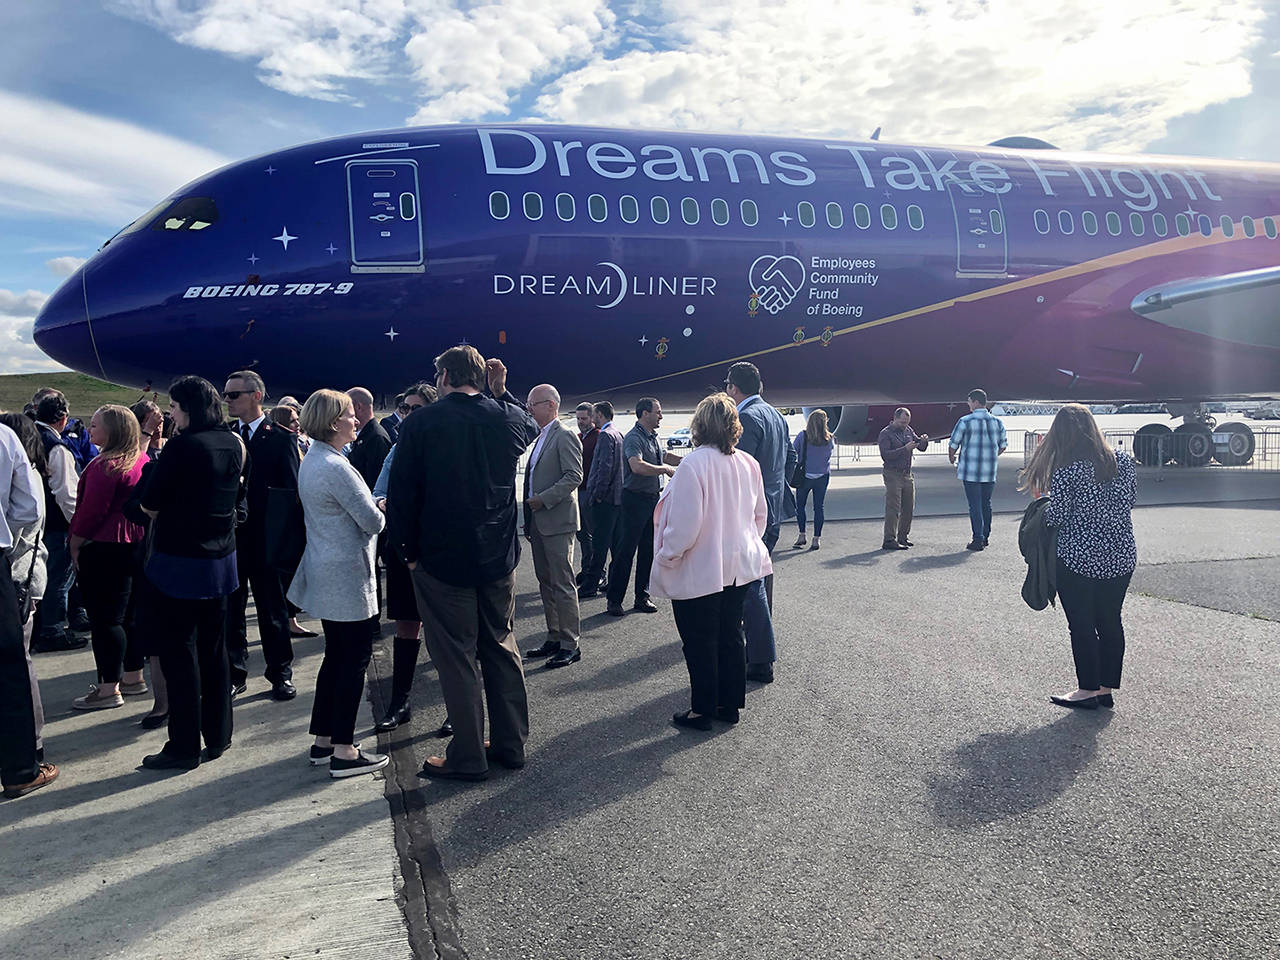 Boeing’s decorated 787 Dreamliner is displayed at a celebration for the Boeing Employees Community Fund in 2018 at the Boeing Future of Flight Aviation Center in Mukilteo. (Janice Podsada / Herald file)